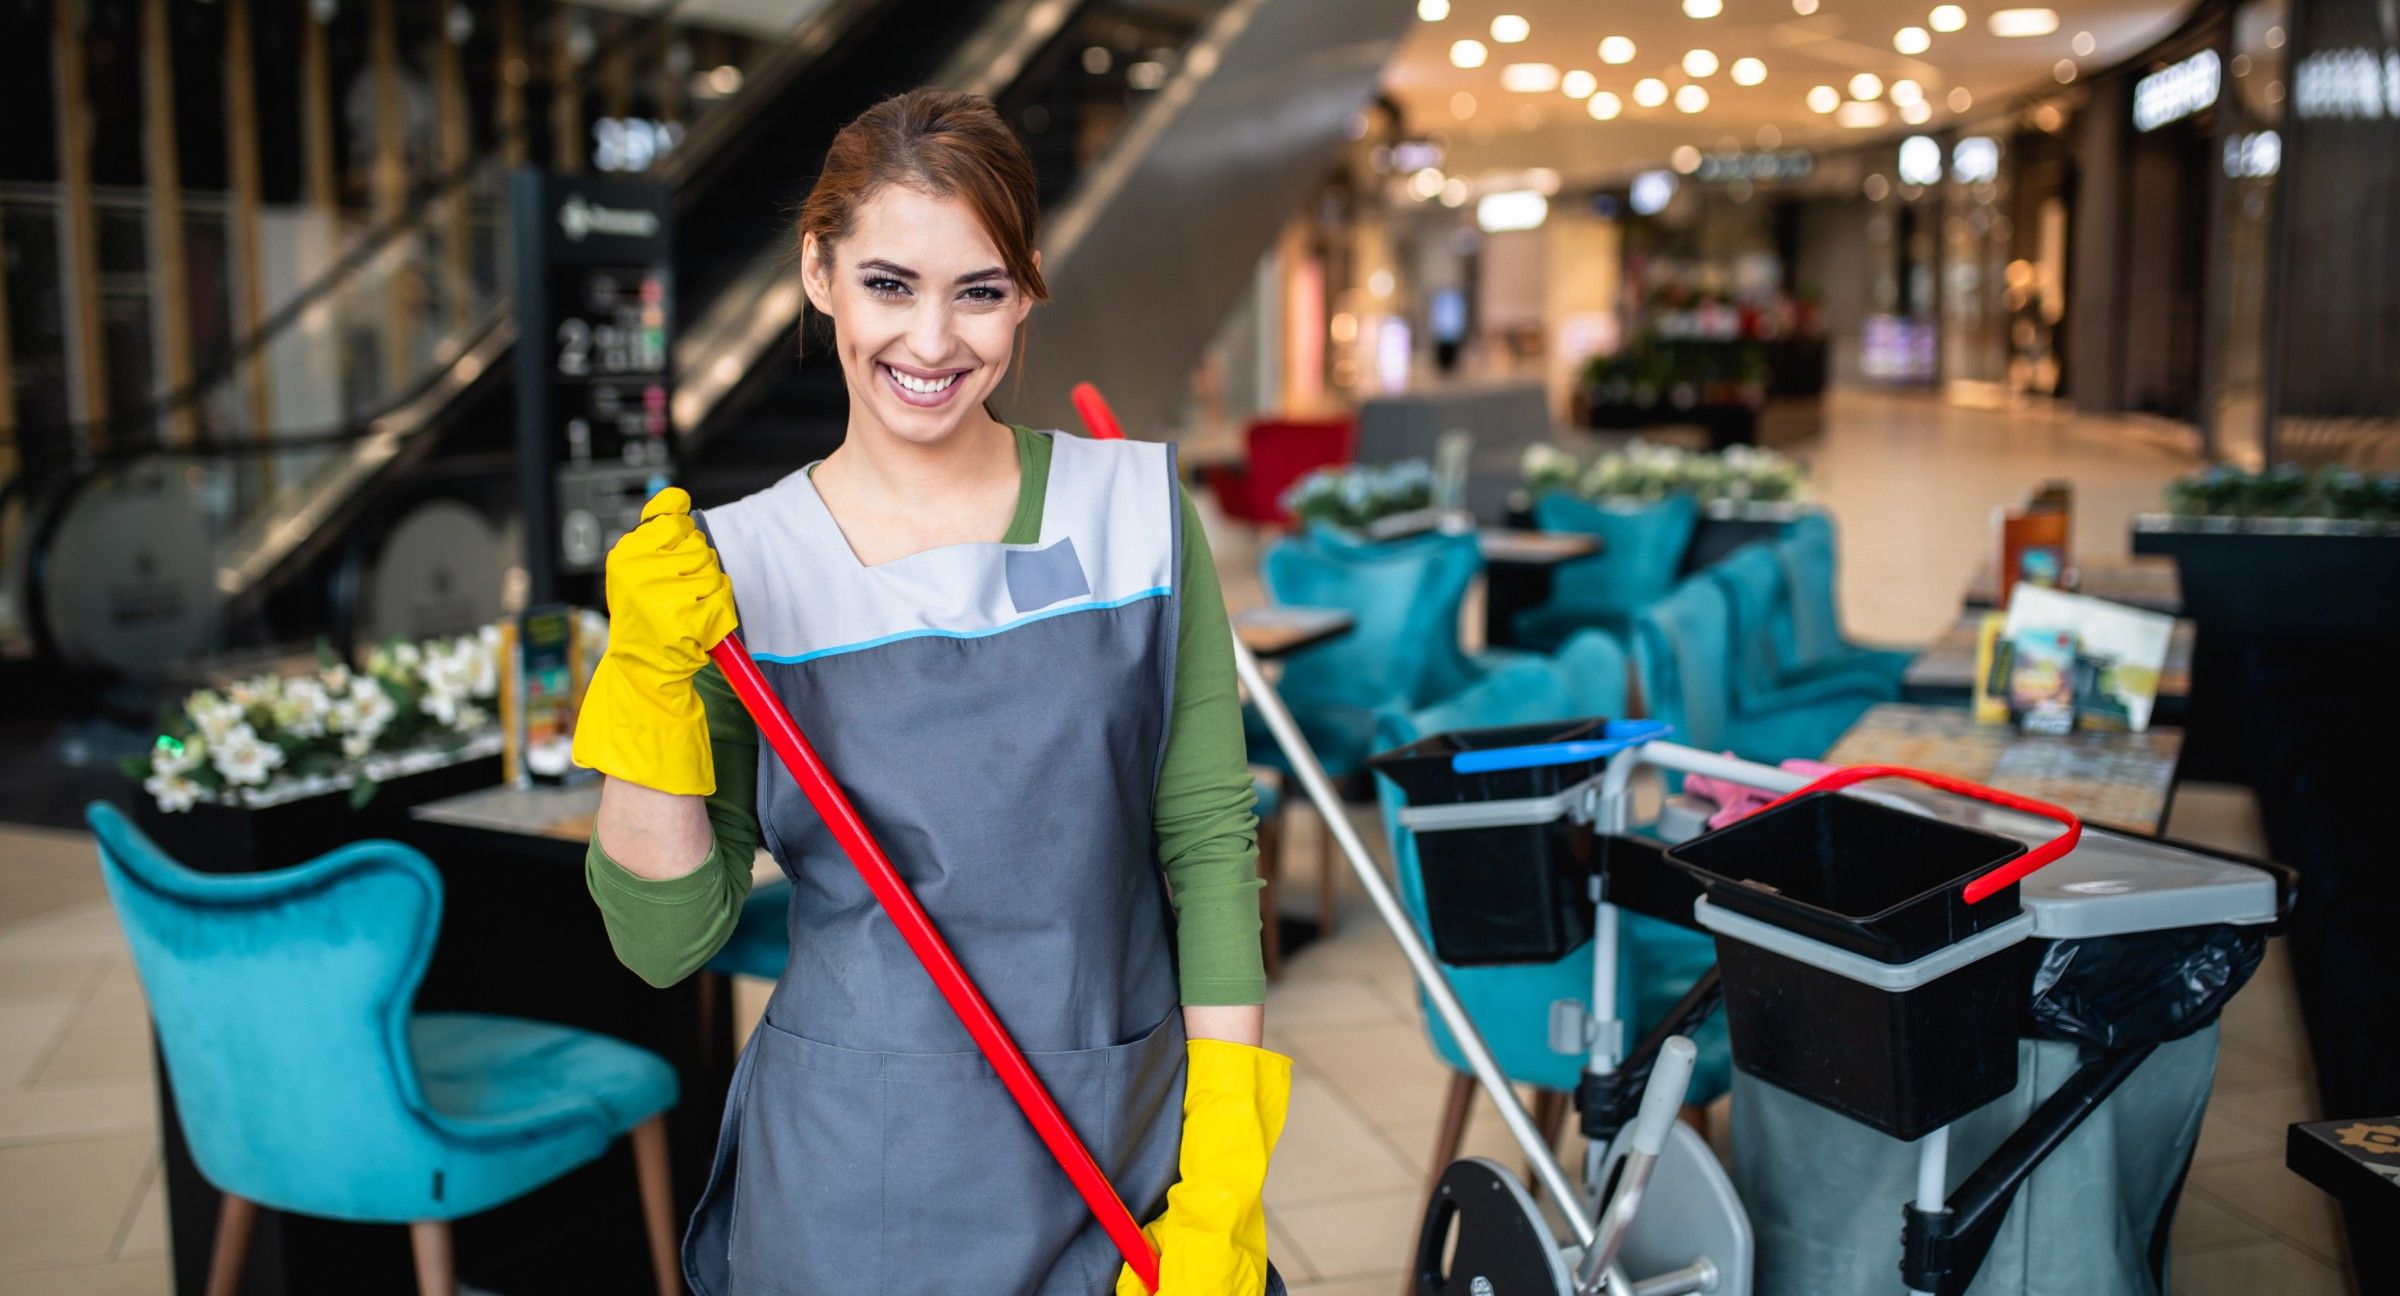 Choosing a Cleaning Company for Your Restaurant